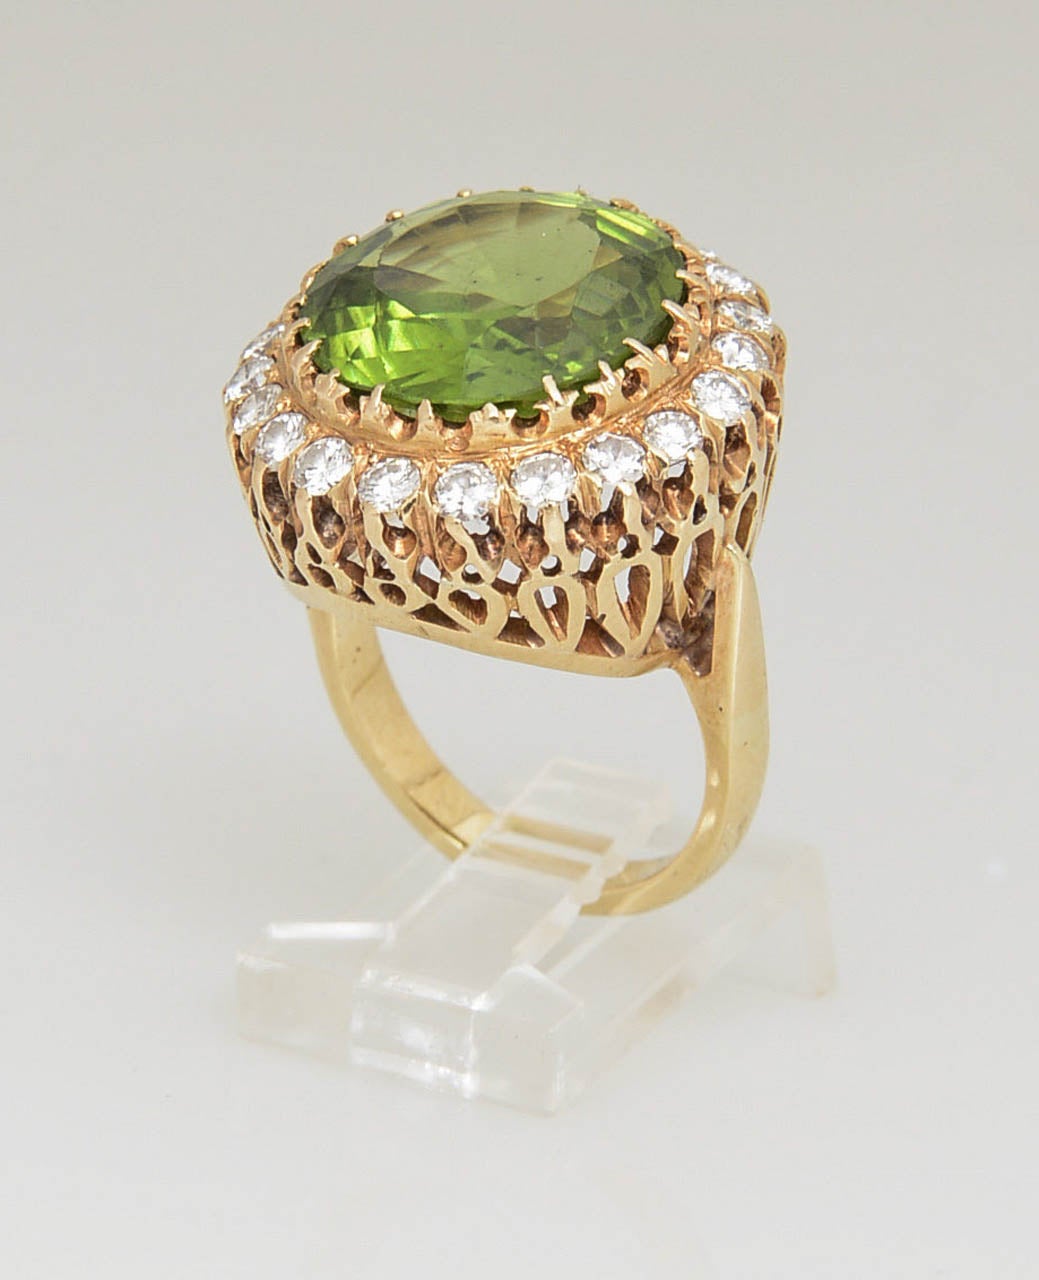 Rare large (15 carat plus) beautiful color peridot set in a diamond frame containing 22 diamonds approximately .03 carats each.  The stone is set in a beautifully designed open work 14k mounting.  
US size 8.5 - it can be sized.